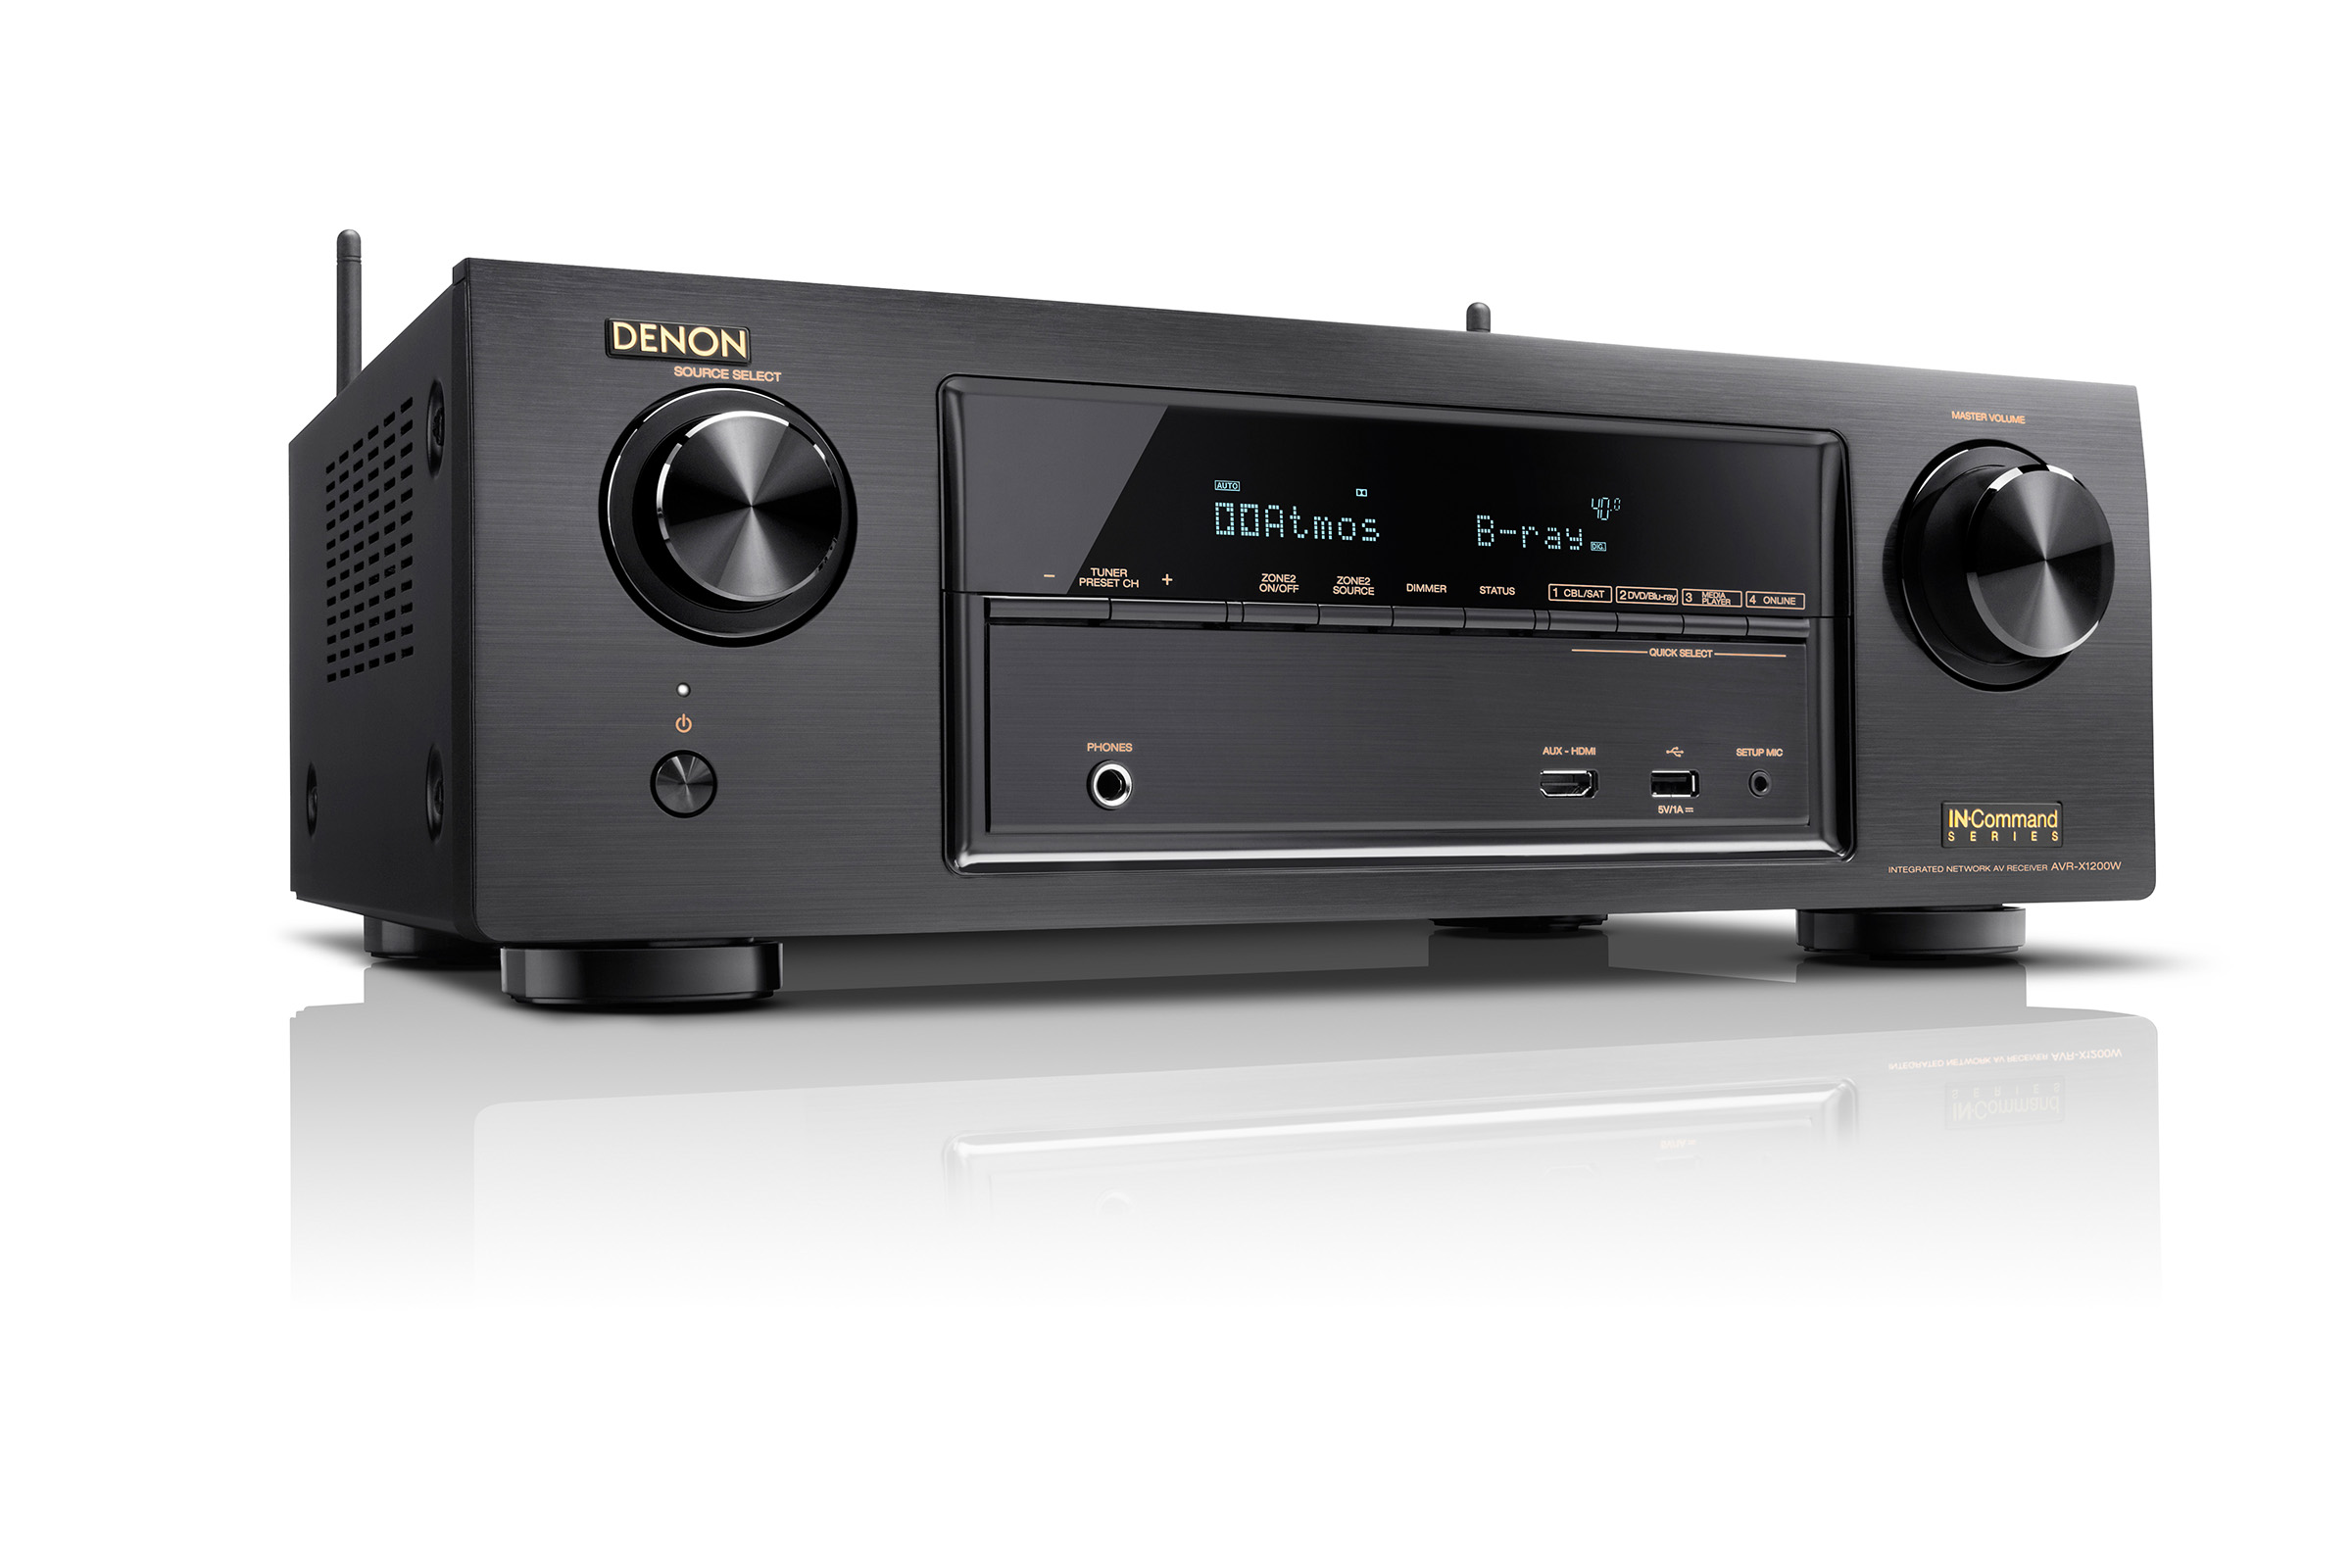 New Series A/V Receivers from Denon